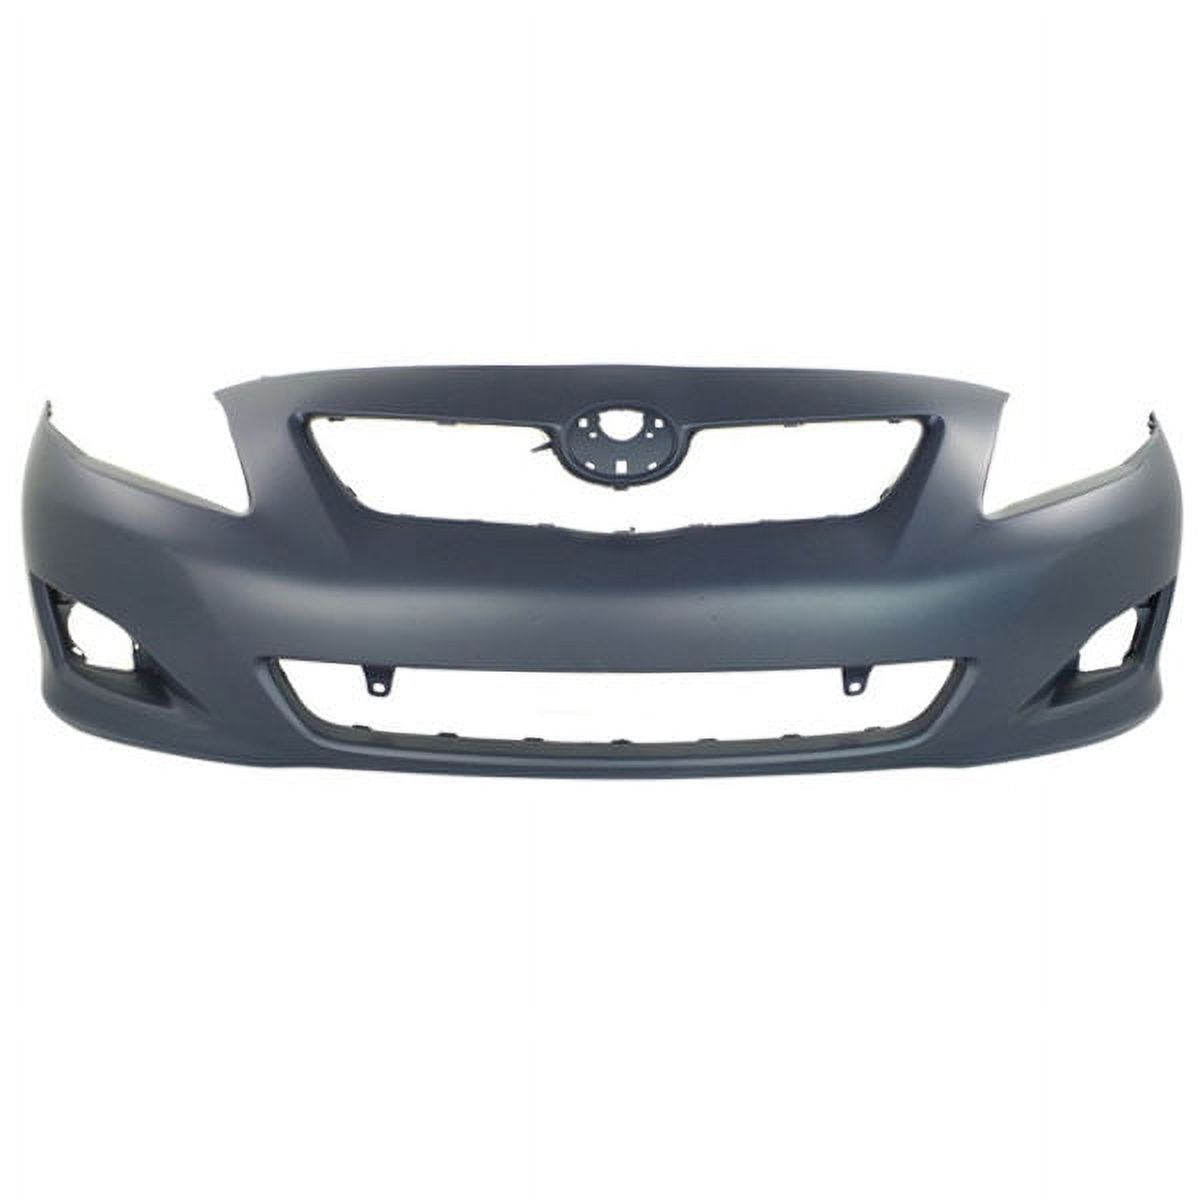 For 09-10 Corolla Front Bumper Cover Assy Primed USA/Japan TO1000343 5211902990 - image 1 of 2